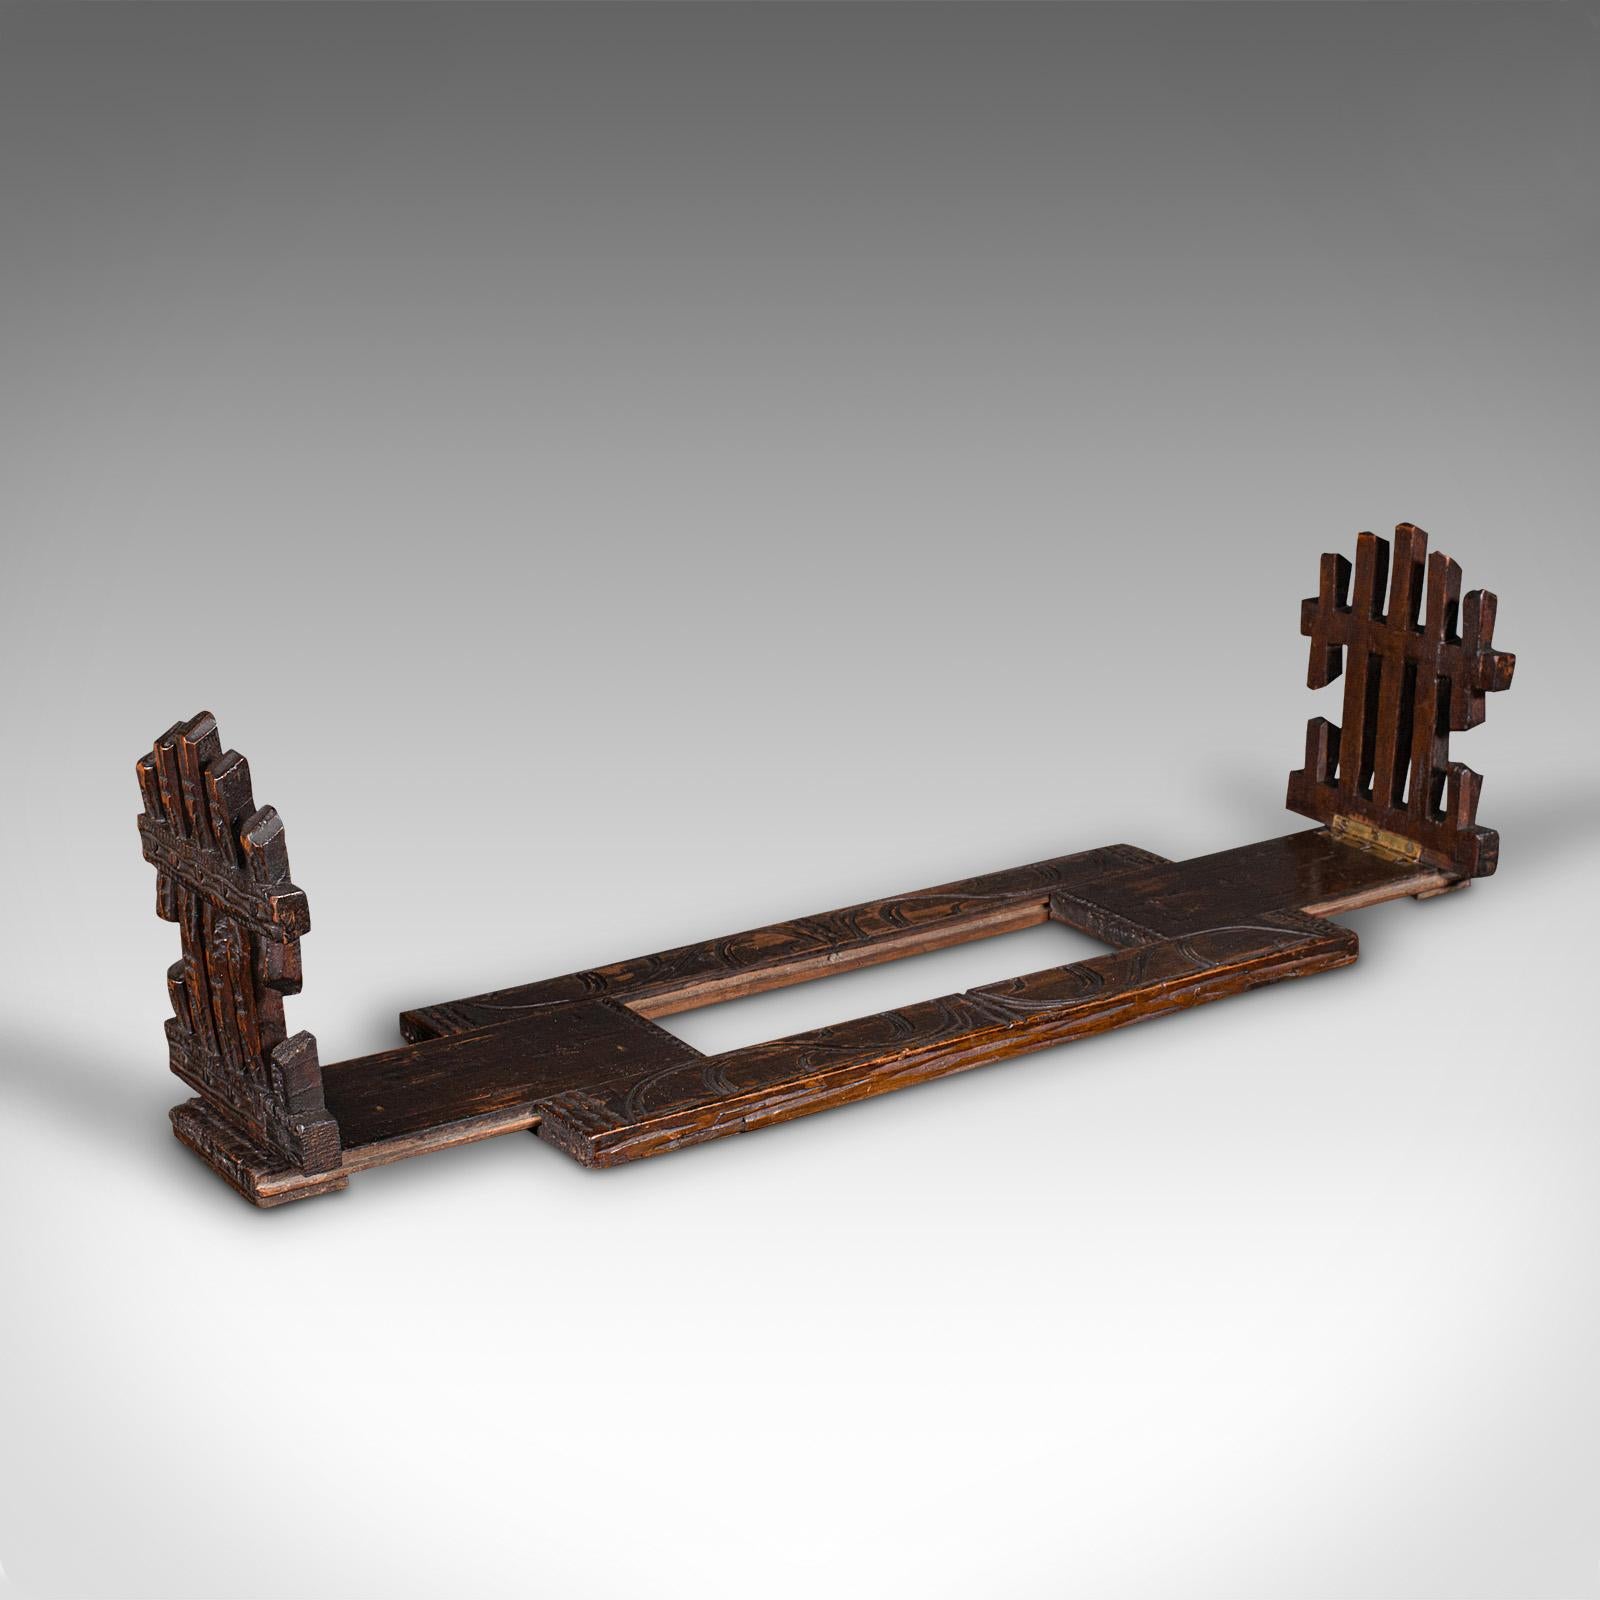 
This is a vintage extending book slide. An Anglo-Indian, mahogany adjustable bookrest, dating to the late Art Deco period, circa 1940.

Fascinatingly distinctive book rest with unusual forms
Displays a desirable aged patina and in good original